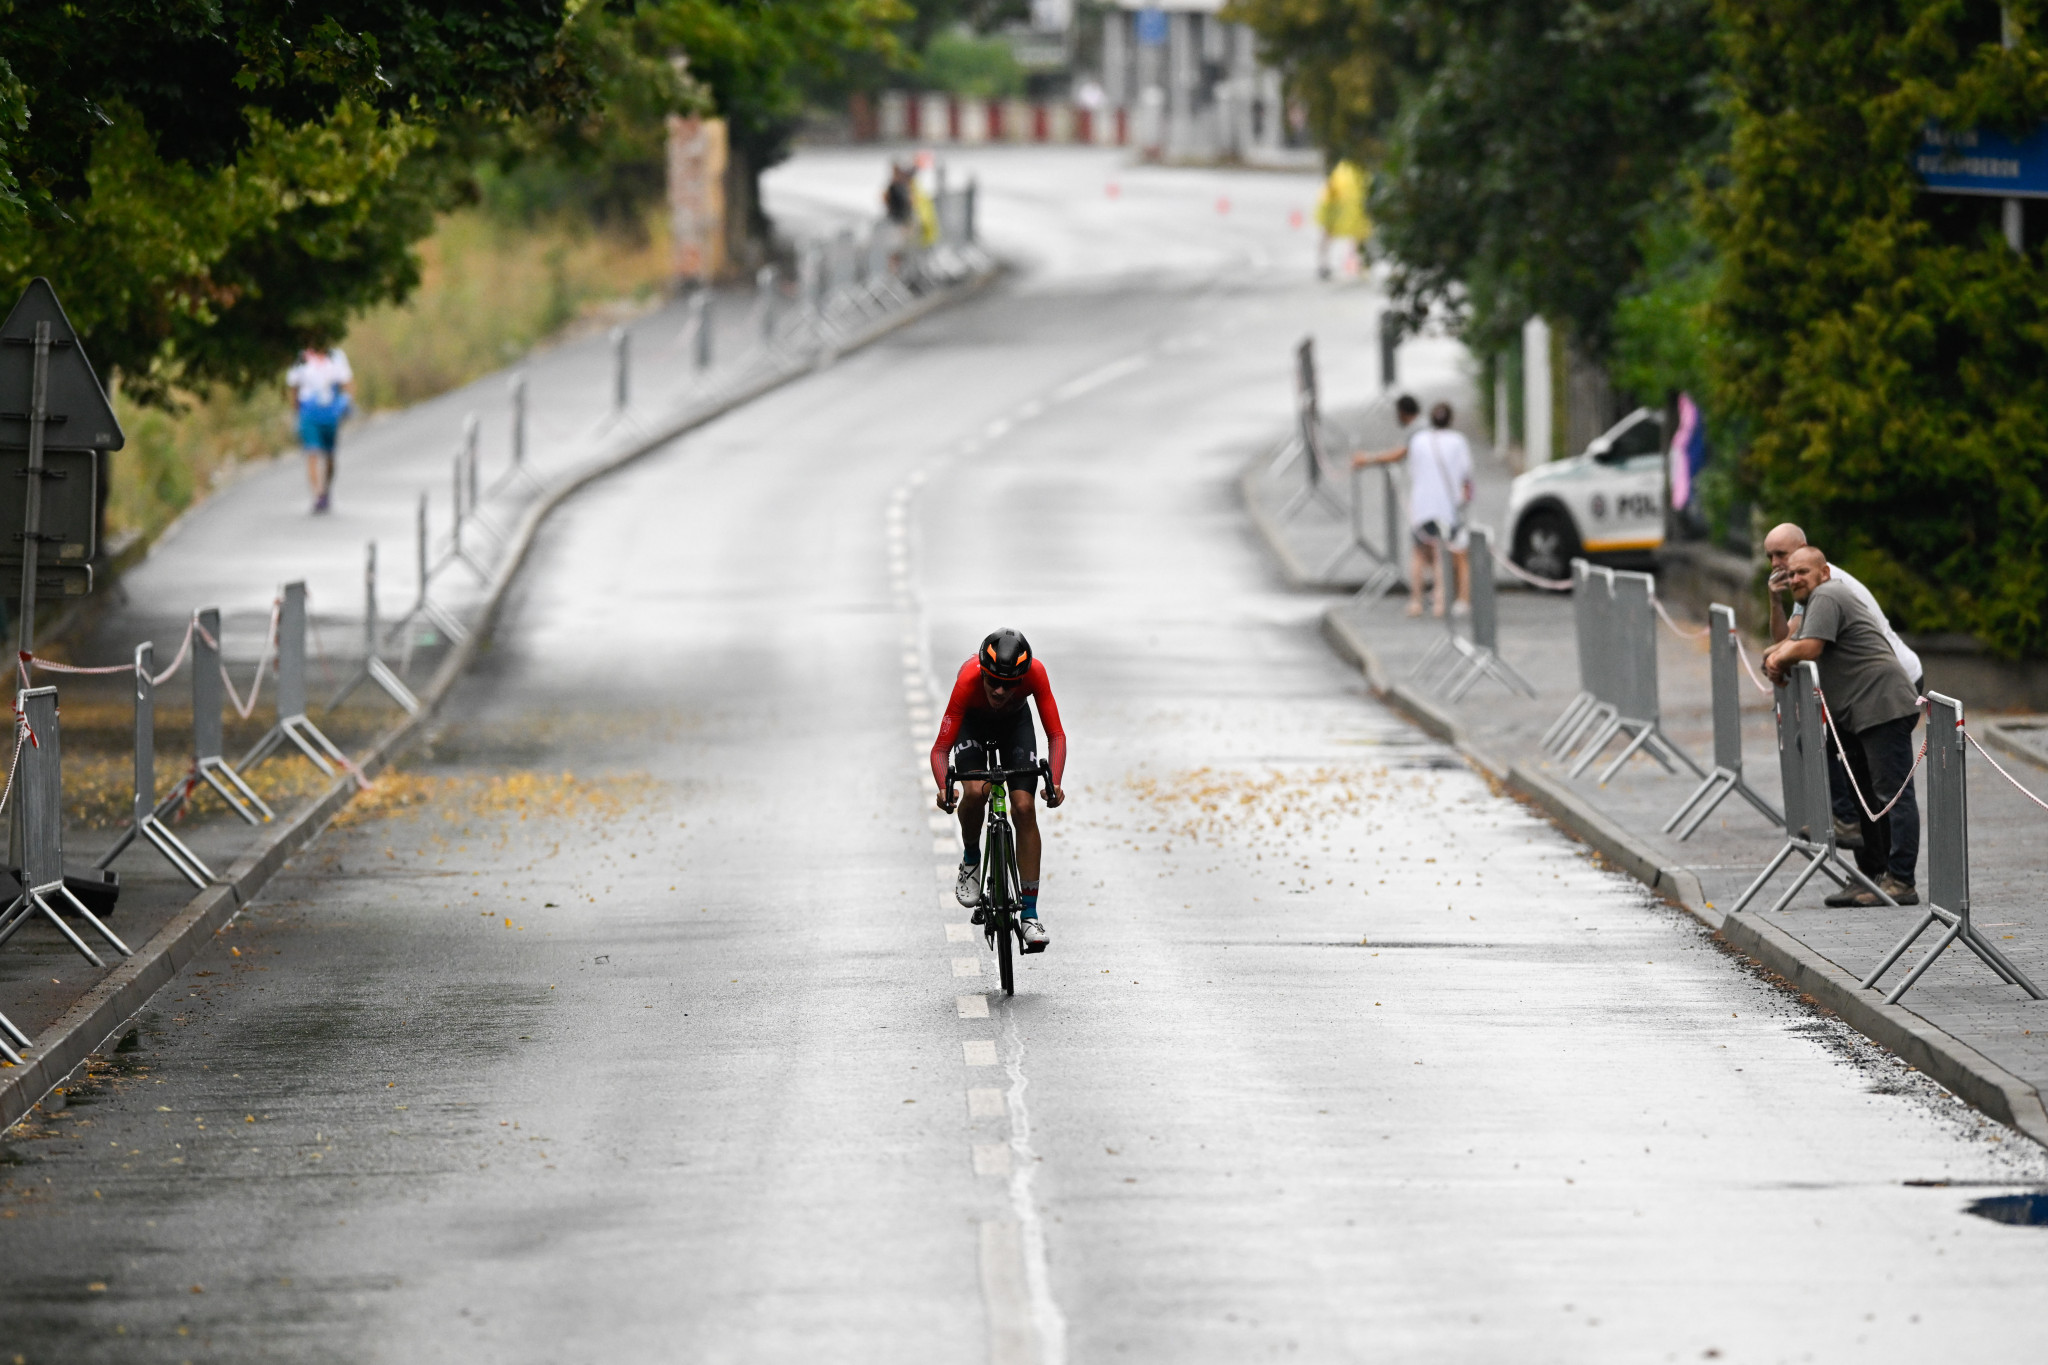 Ferguson and Goszczurny storm to cycling golds at Banská Bystrica EYOF in poor weather